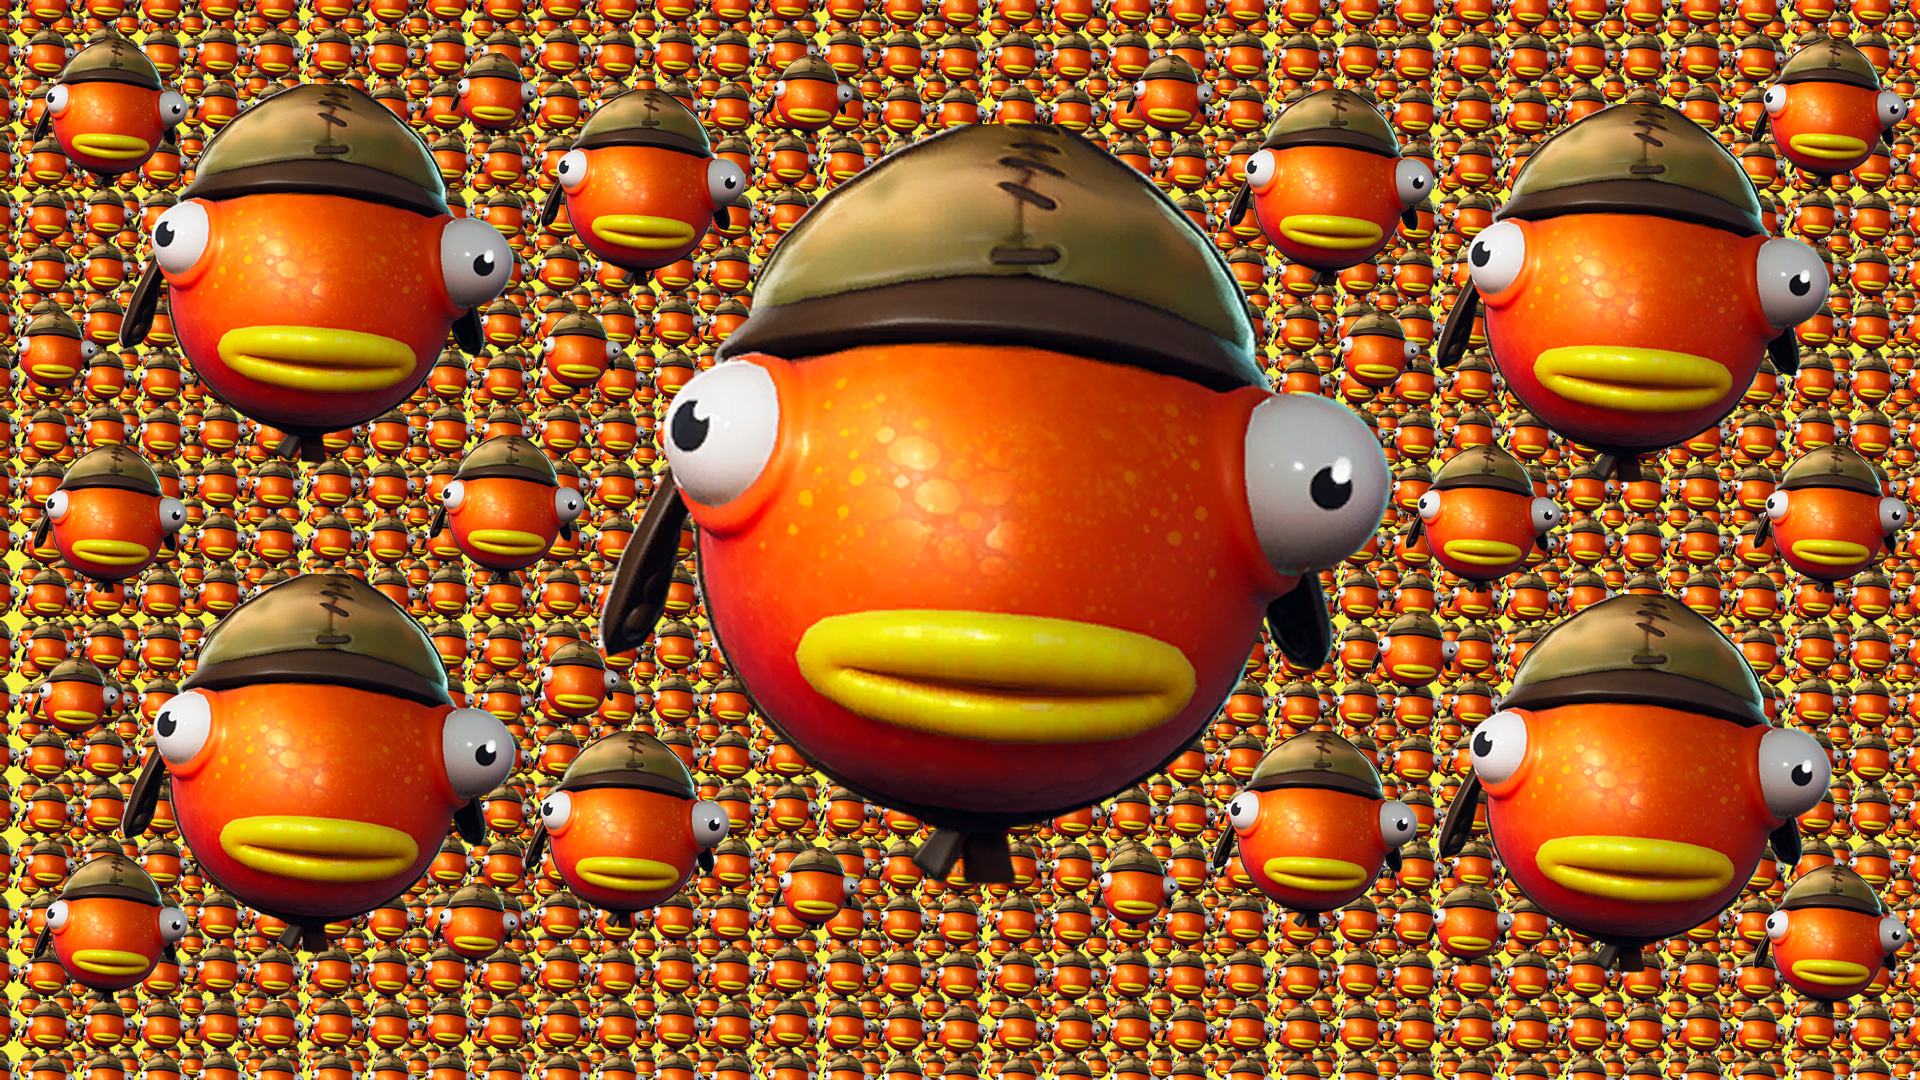 Someone asked for a stupid looking Fishstick wallpaper, and all I could think of was that stupid face over and over and over